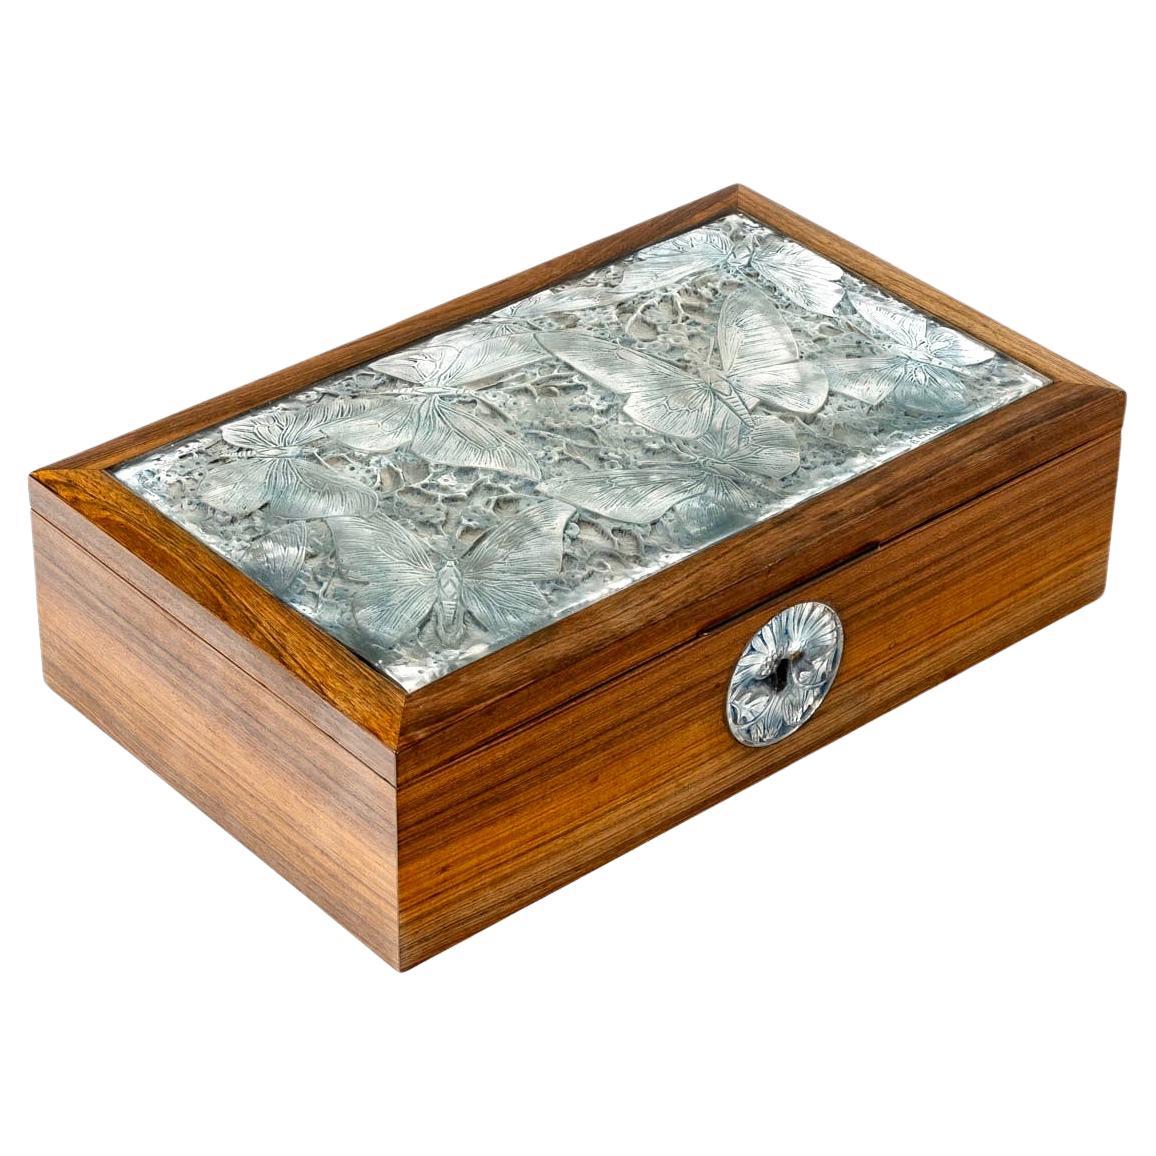 1920 René Lalique Box Papillons Glass With Sepia Patina and Wood Butterflies For Sale